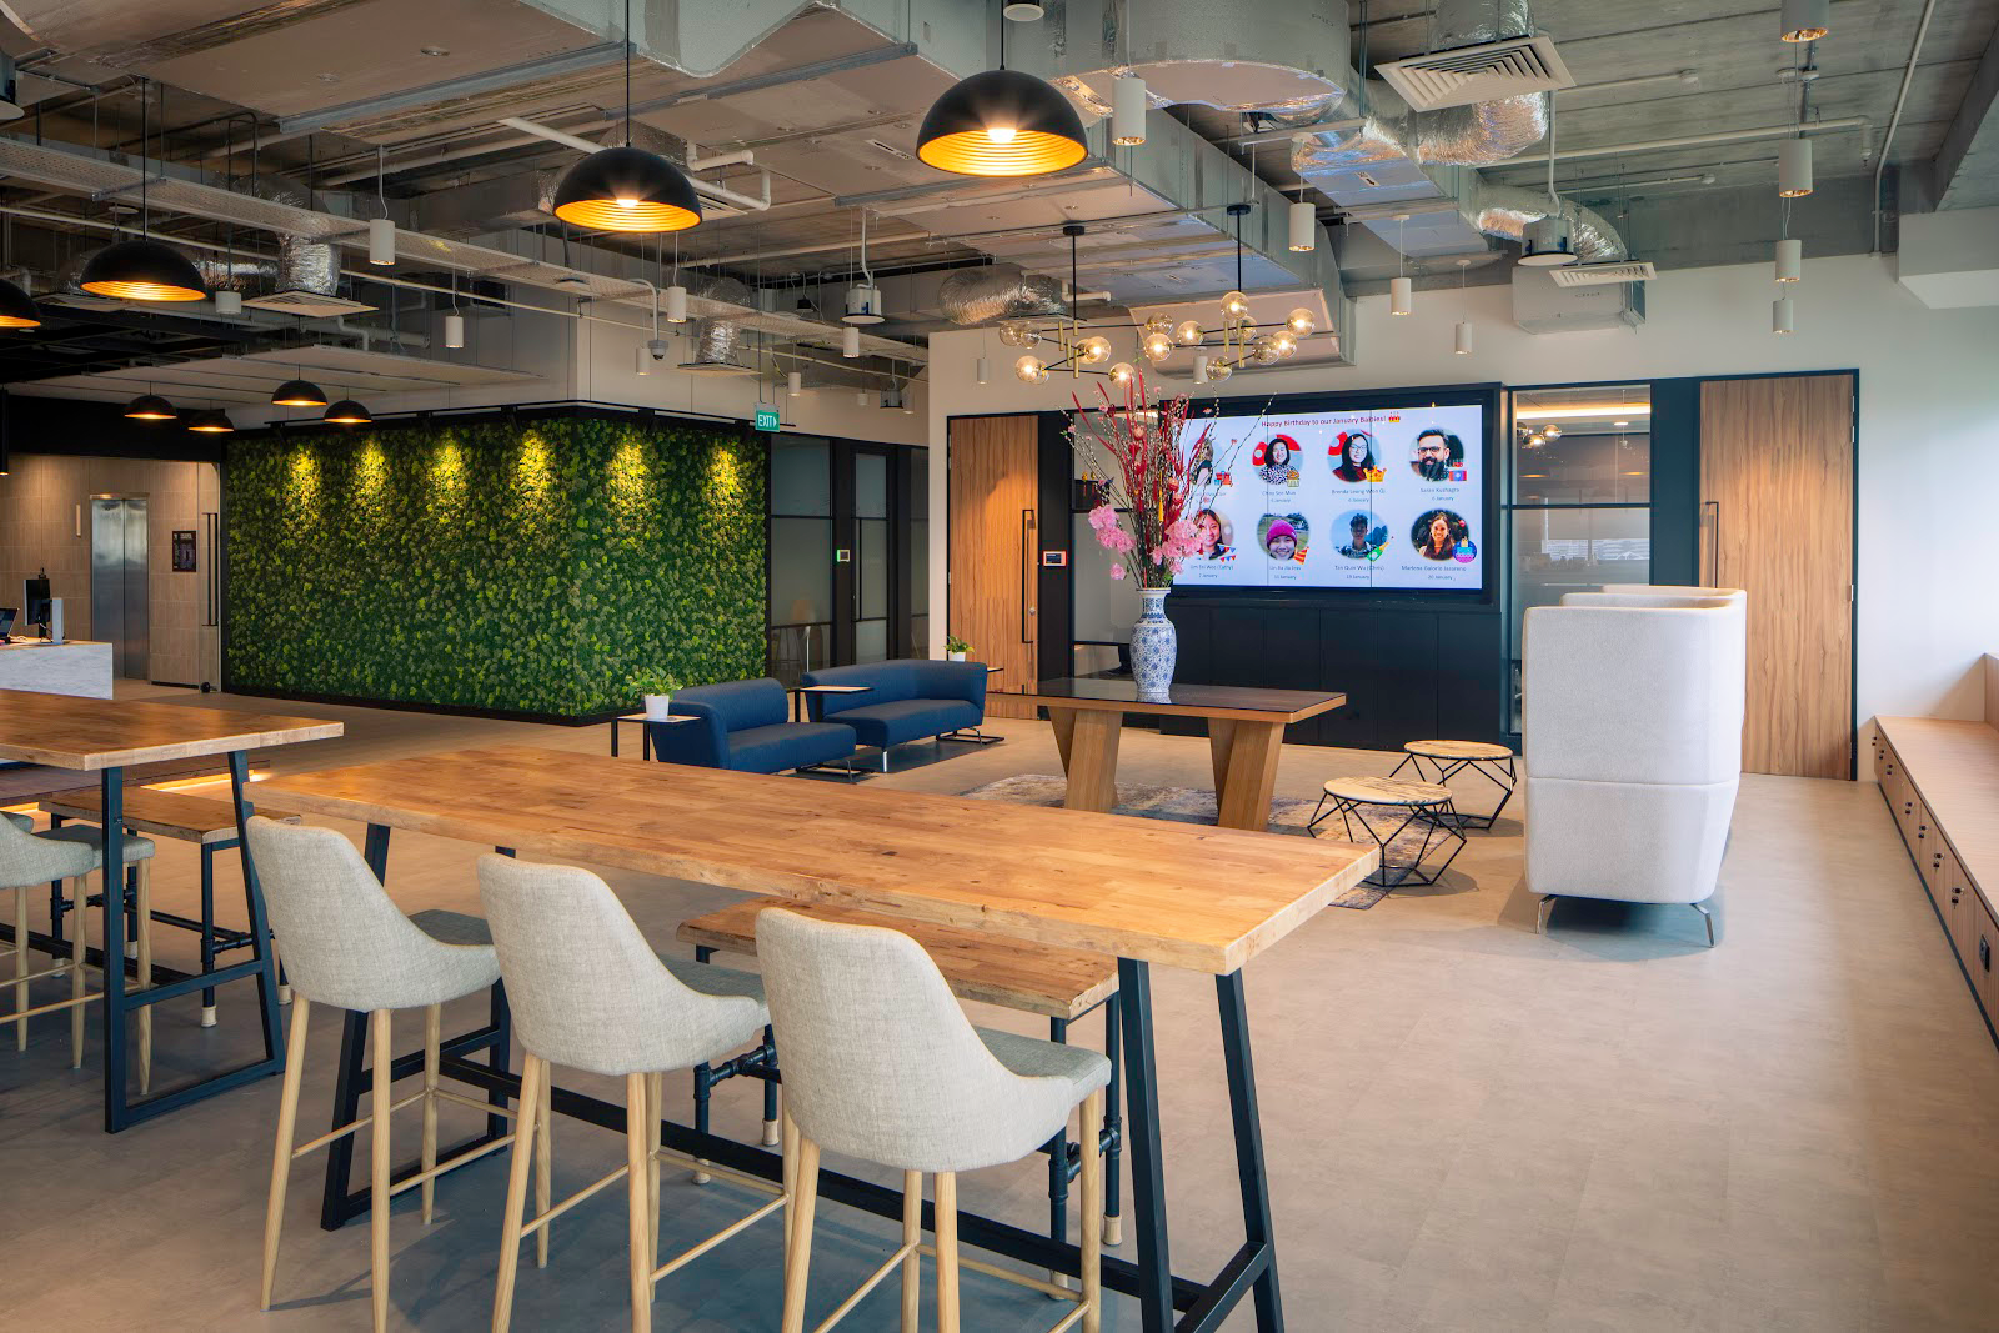 Omnicom’s workplace encourages collaboration and interaction by easily converting modular workspaces into ‘neighbourhoods’